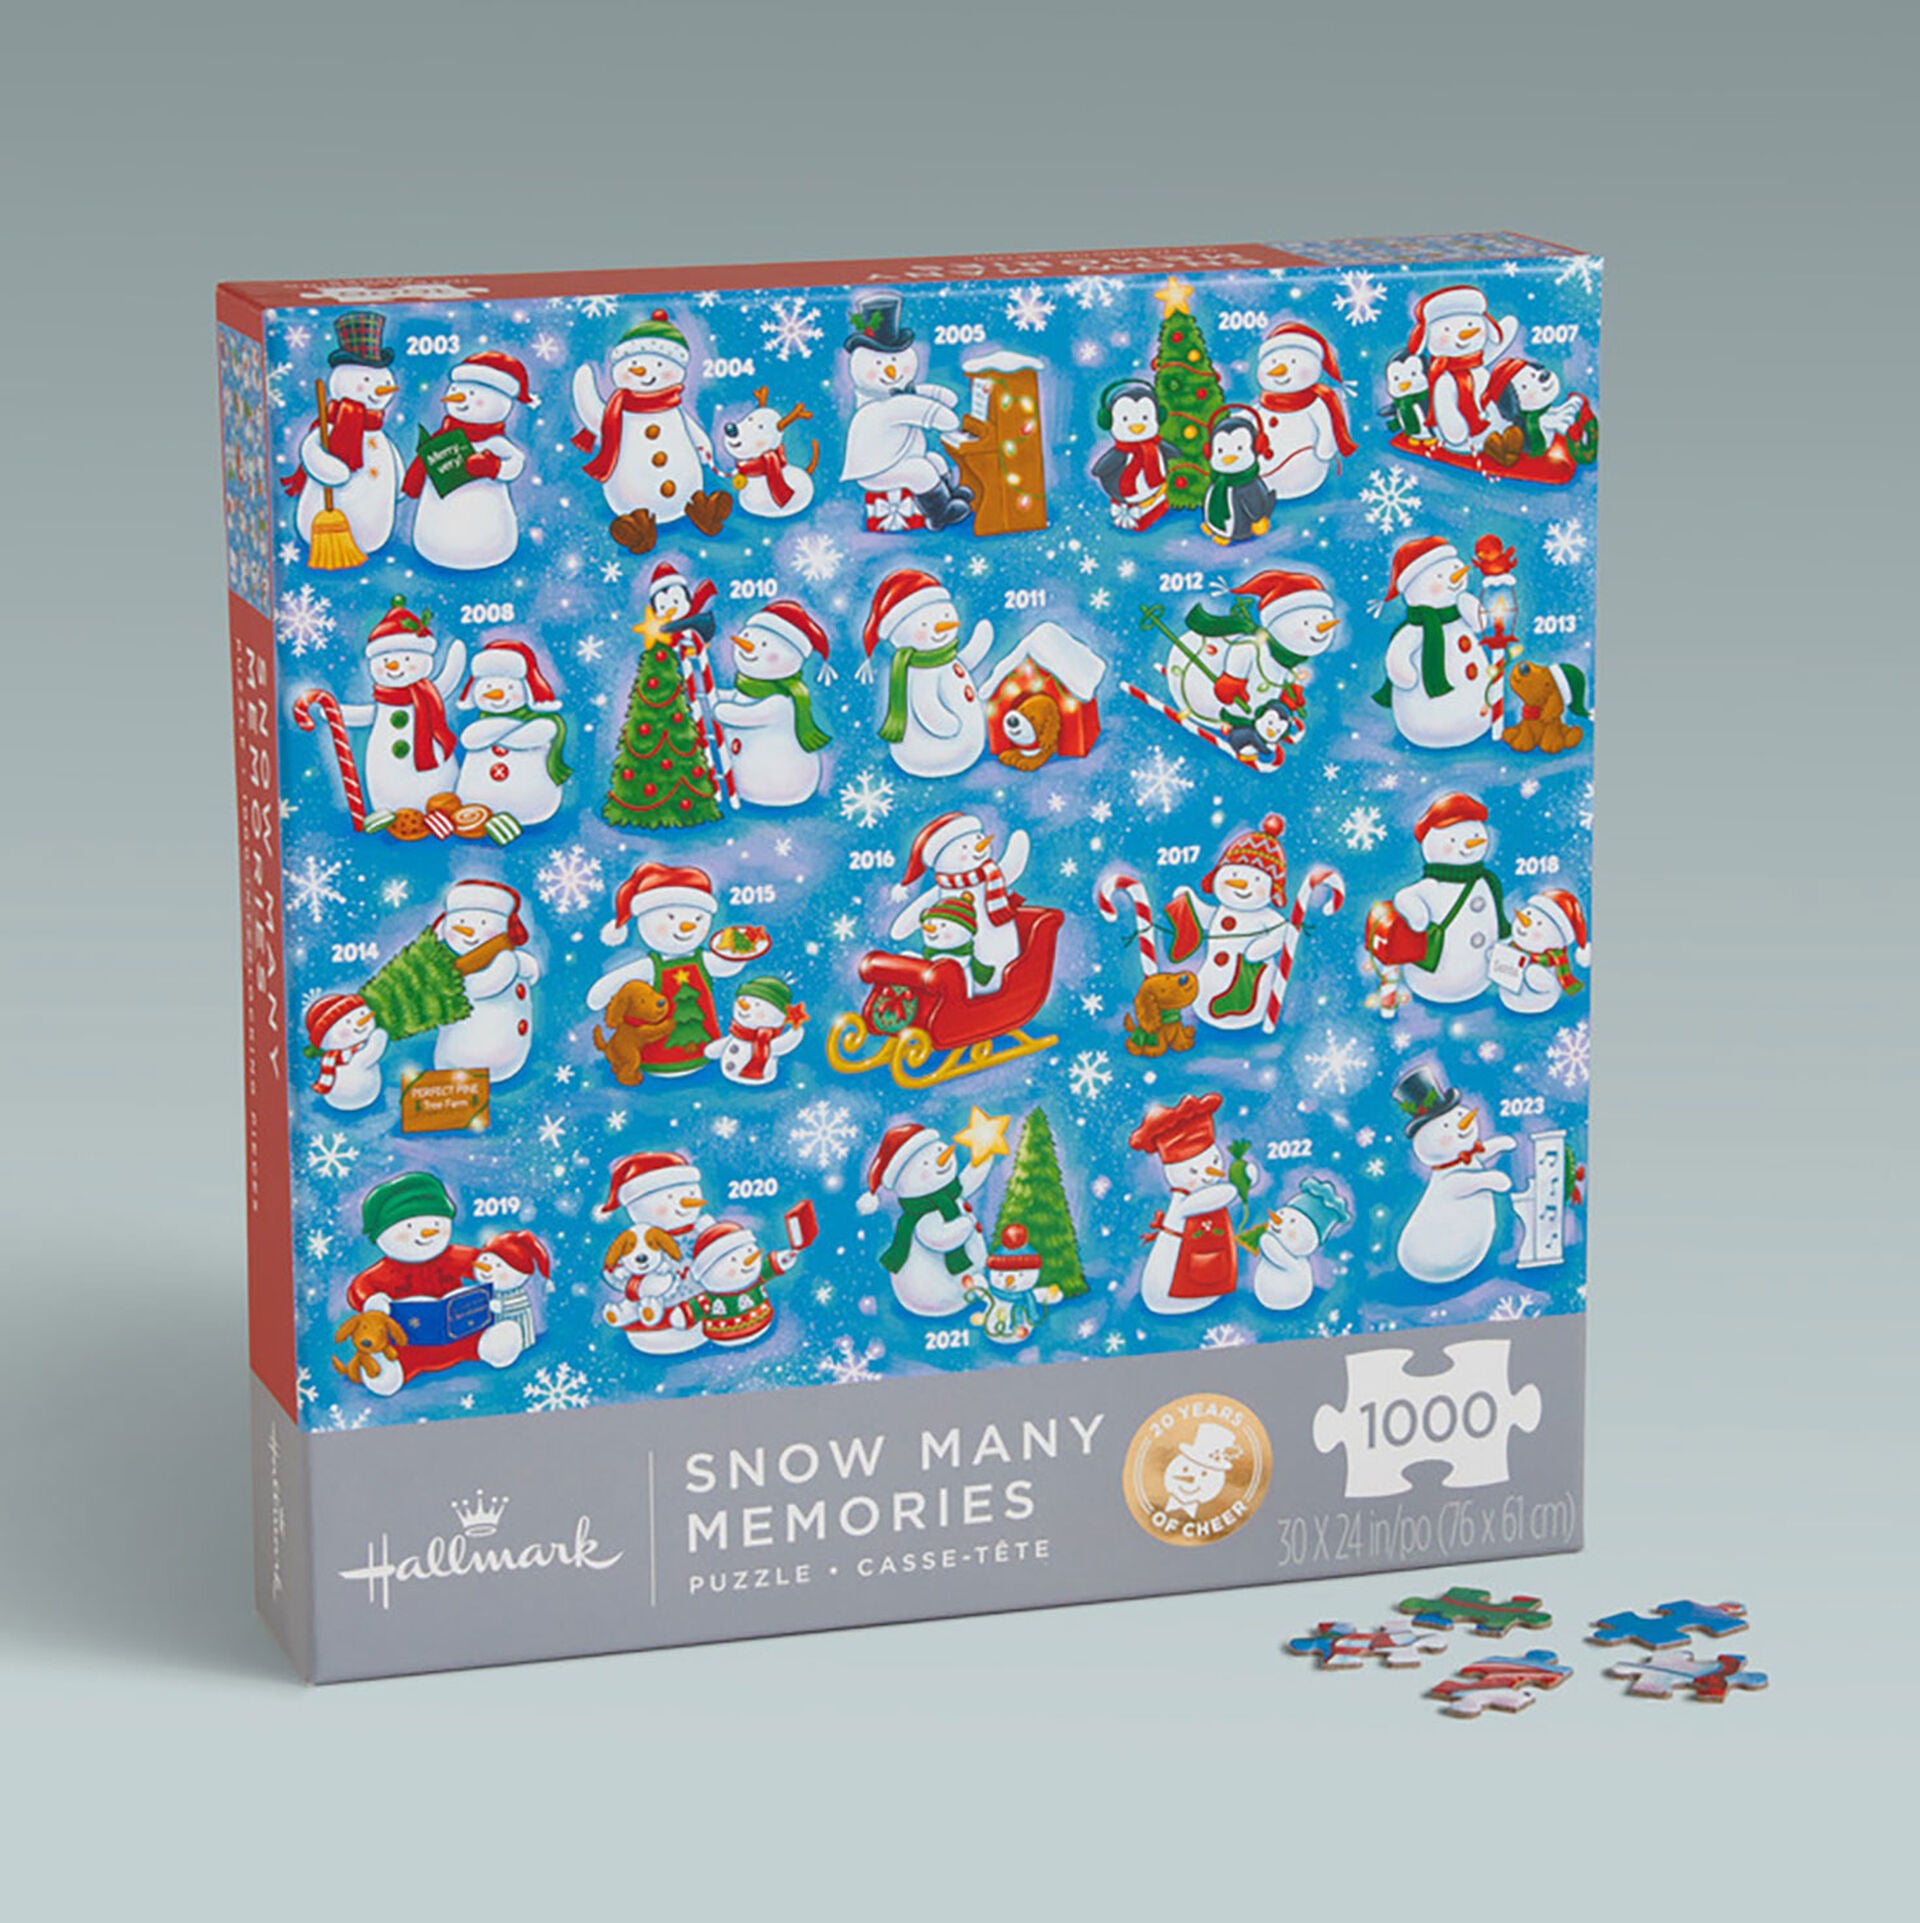 20th Anniversary Snow Many Memories 1,000-Piece Jigsaw Puzzle